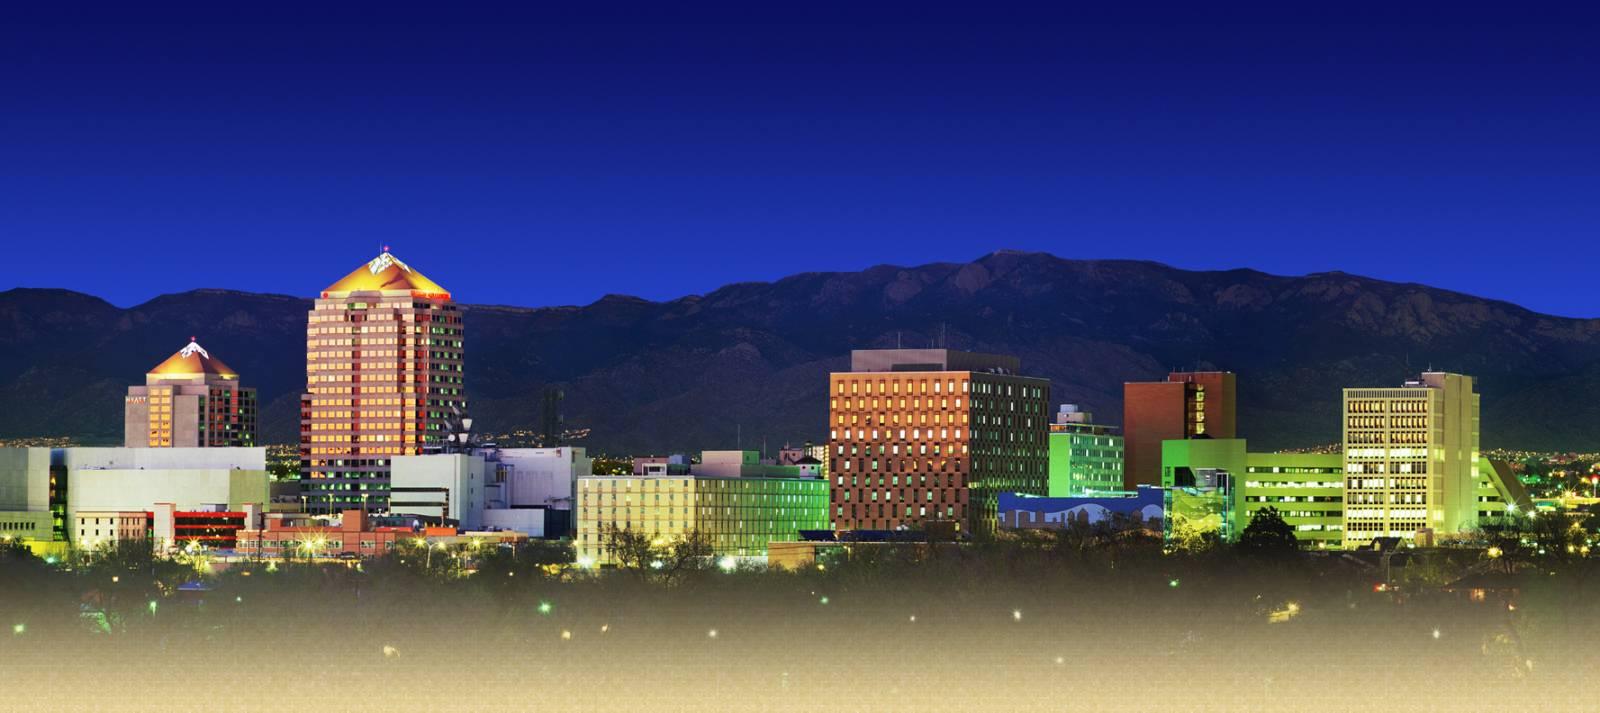 City Background In High Quality: Albuquerque By Kyle Rooney, 23 11 2015